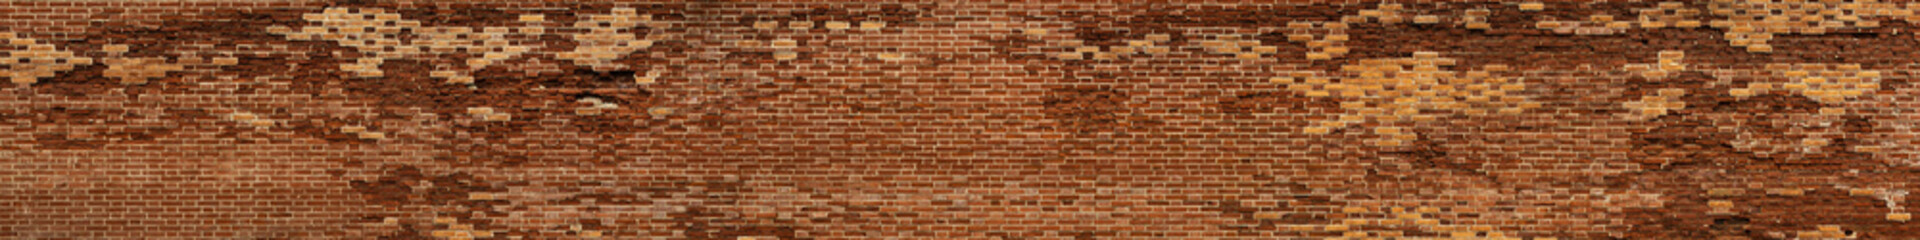 creative brick background of long ancient chipped wall